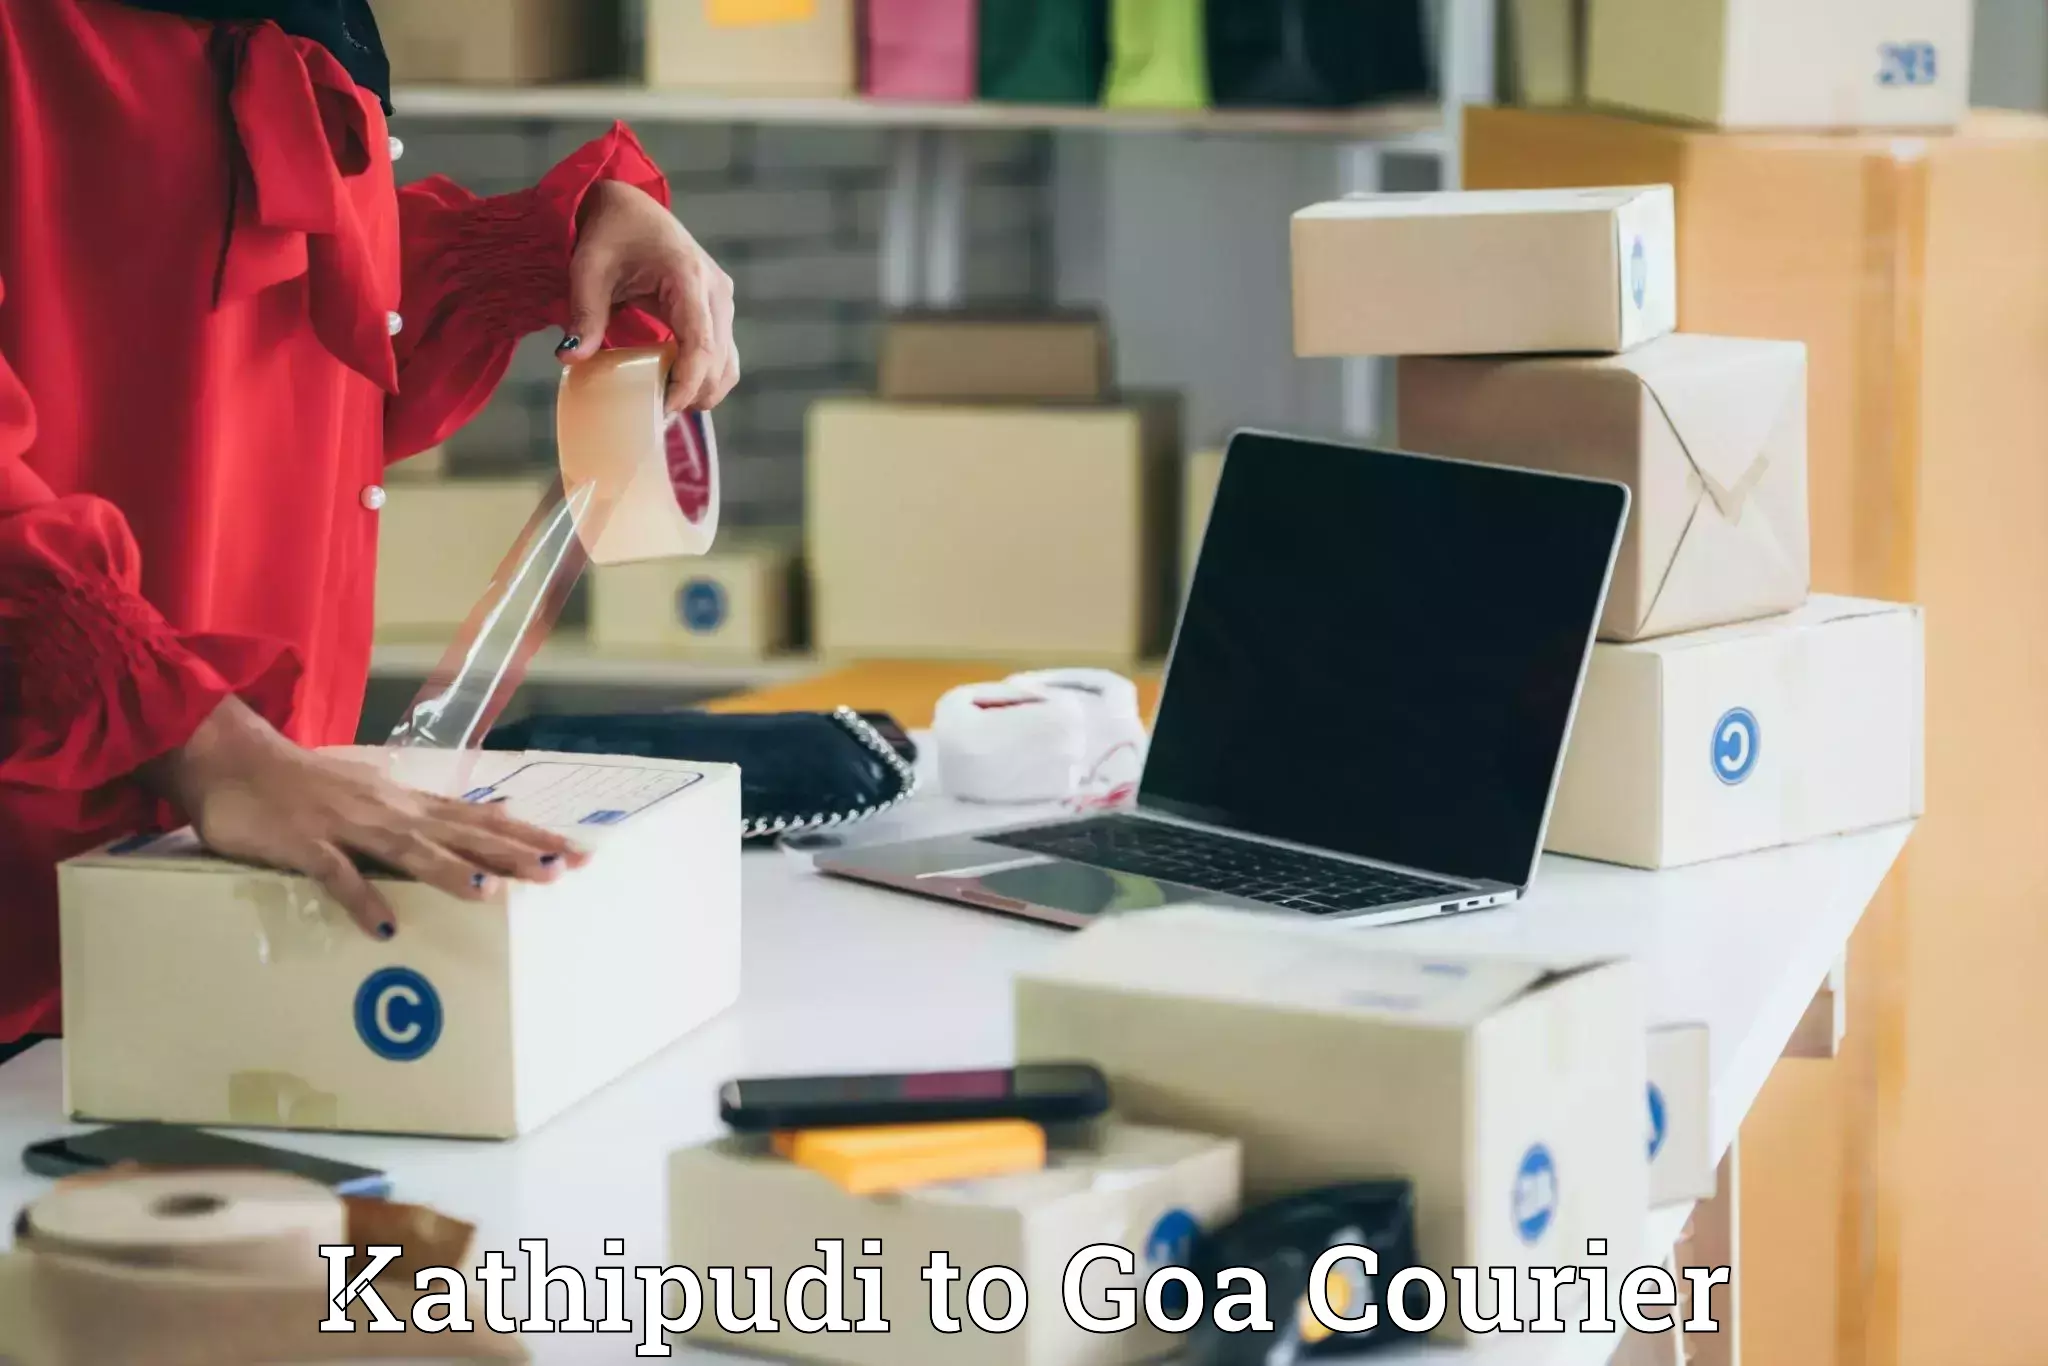 Courier service efficiency Kathipudi to South Goa